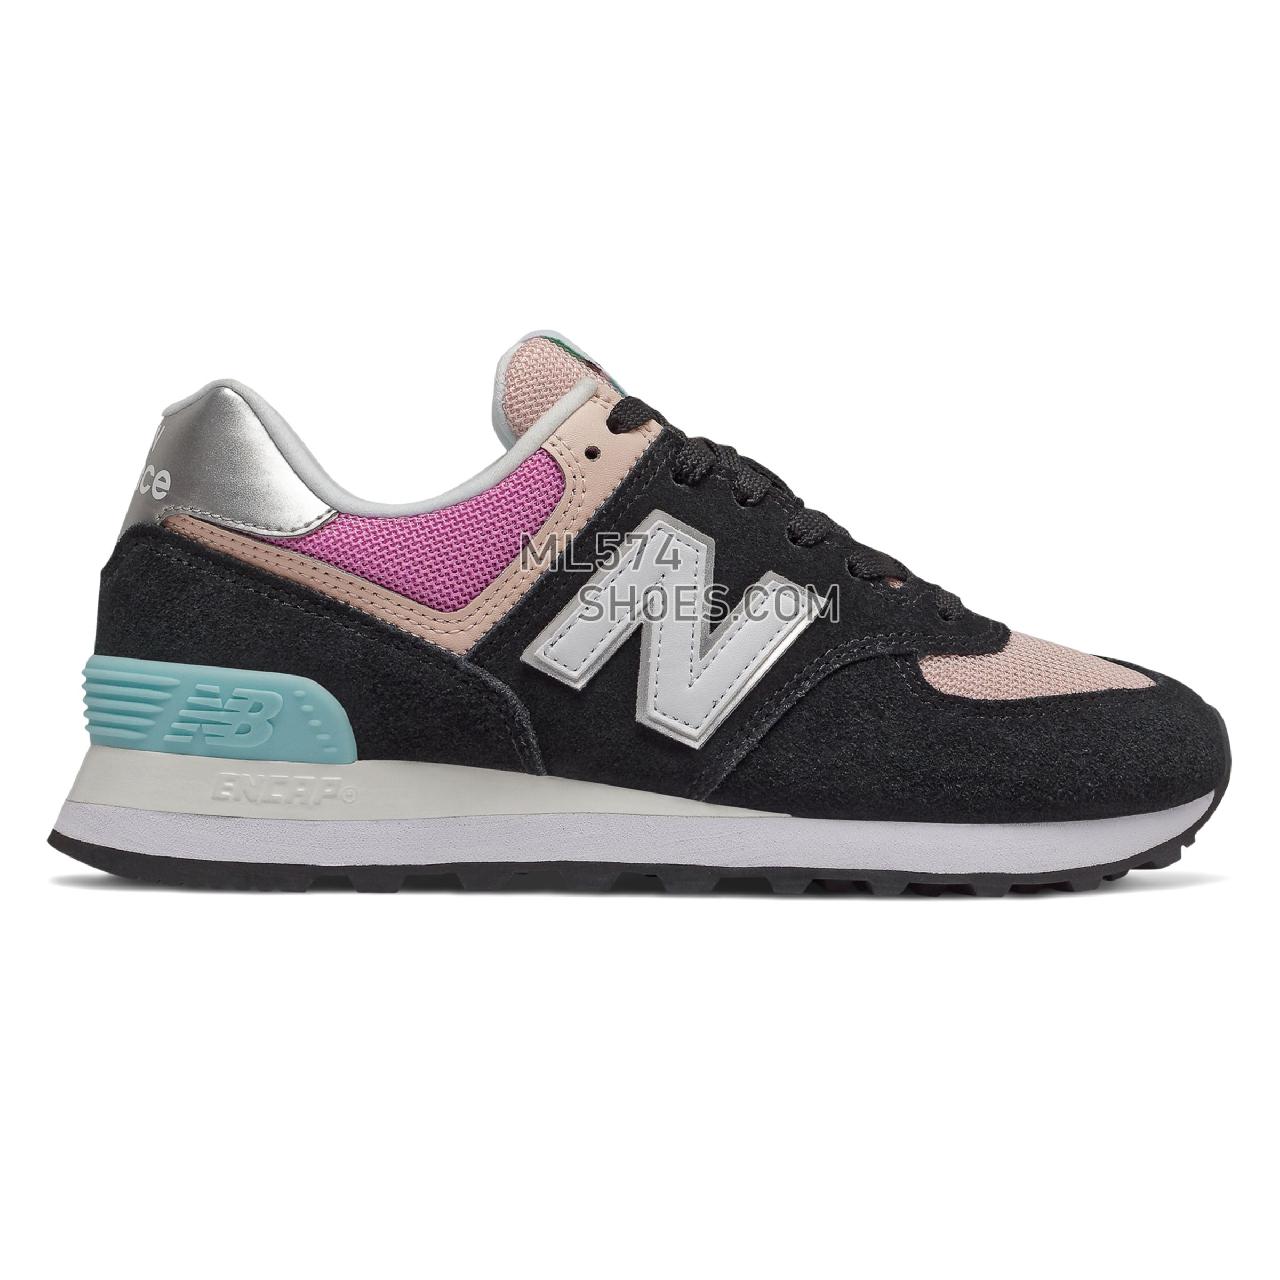 New Balance 574 - Women's Whats Trending - Black with Madder Rose - WL574SOS